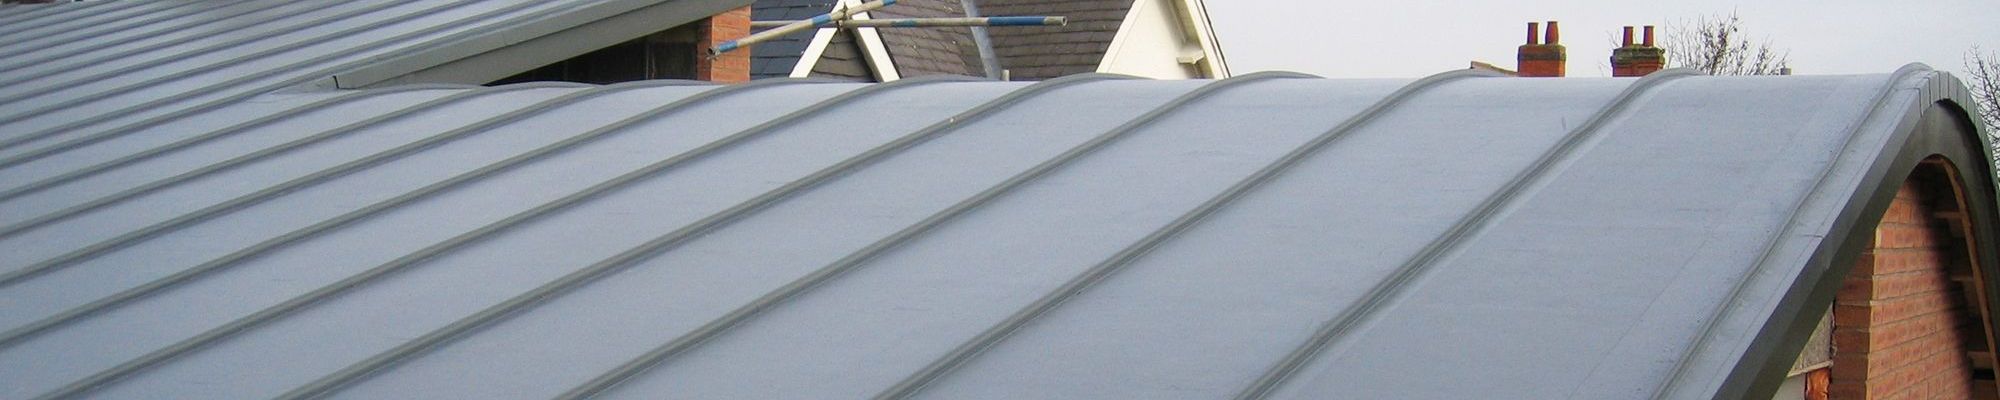 Contact Midland Roofing Services (Derby) Ltd